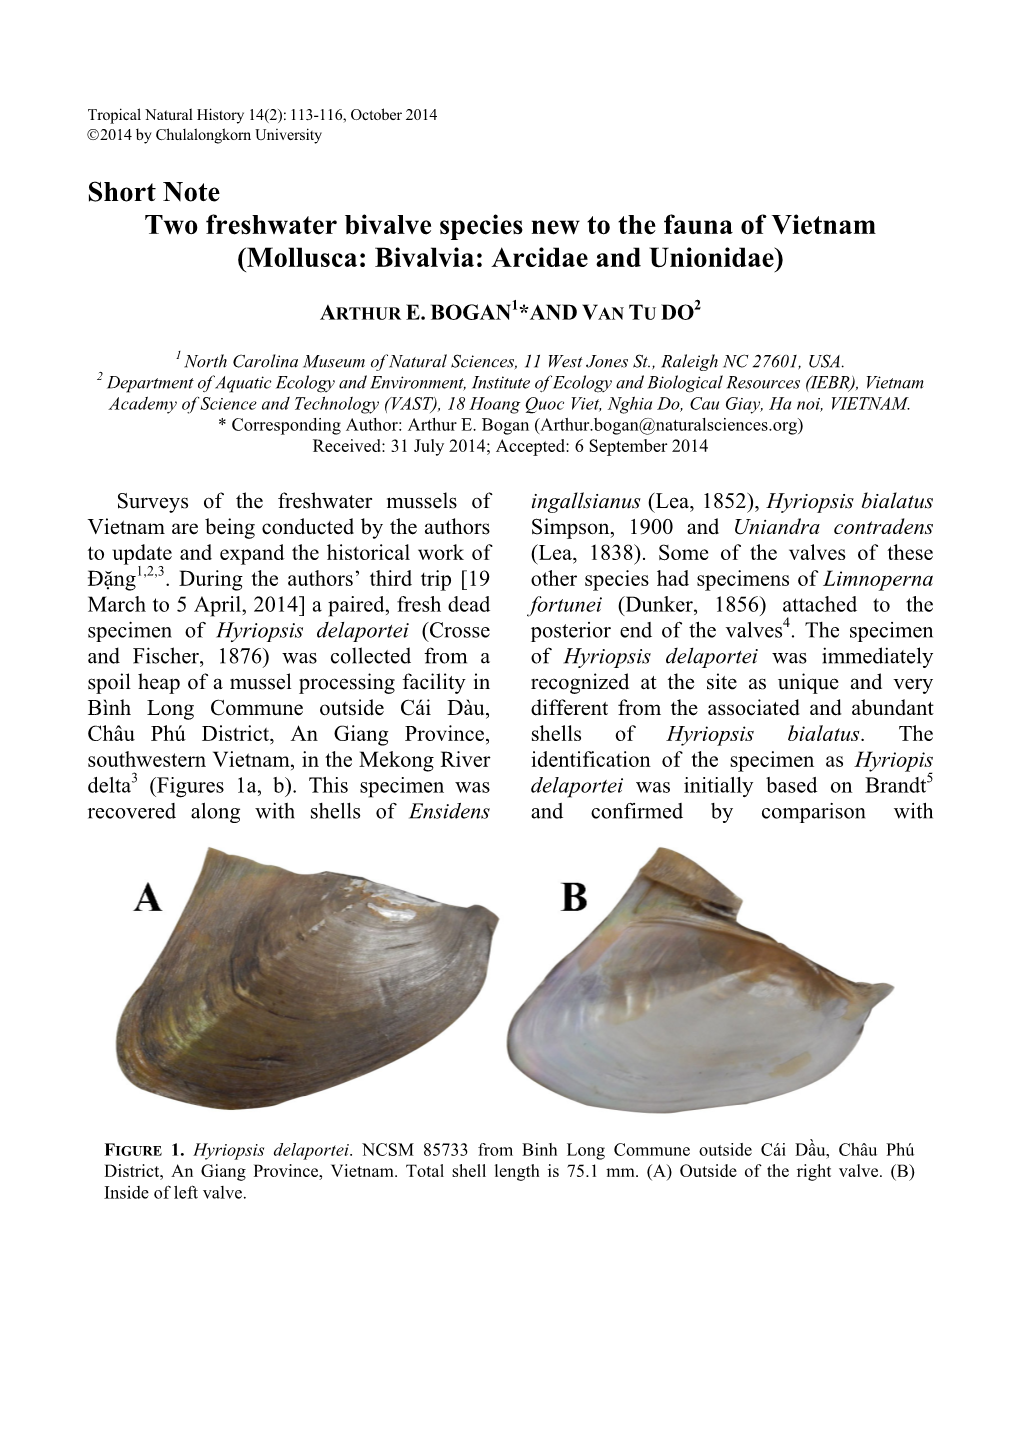 Short Note Two Freshwater Bivalve Species New to the Fauna of Vietnam (Mollusca: Bivalvia: Arcidae and Unionidae)